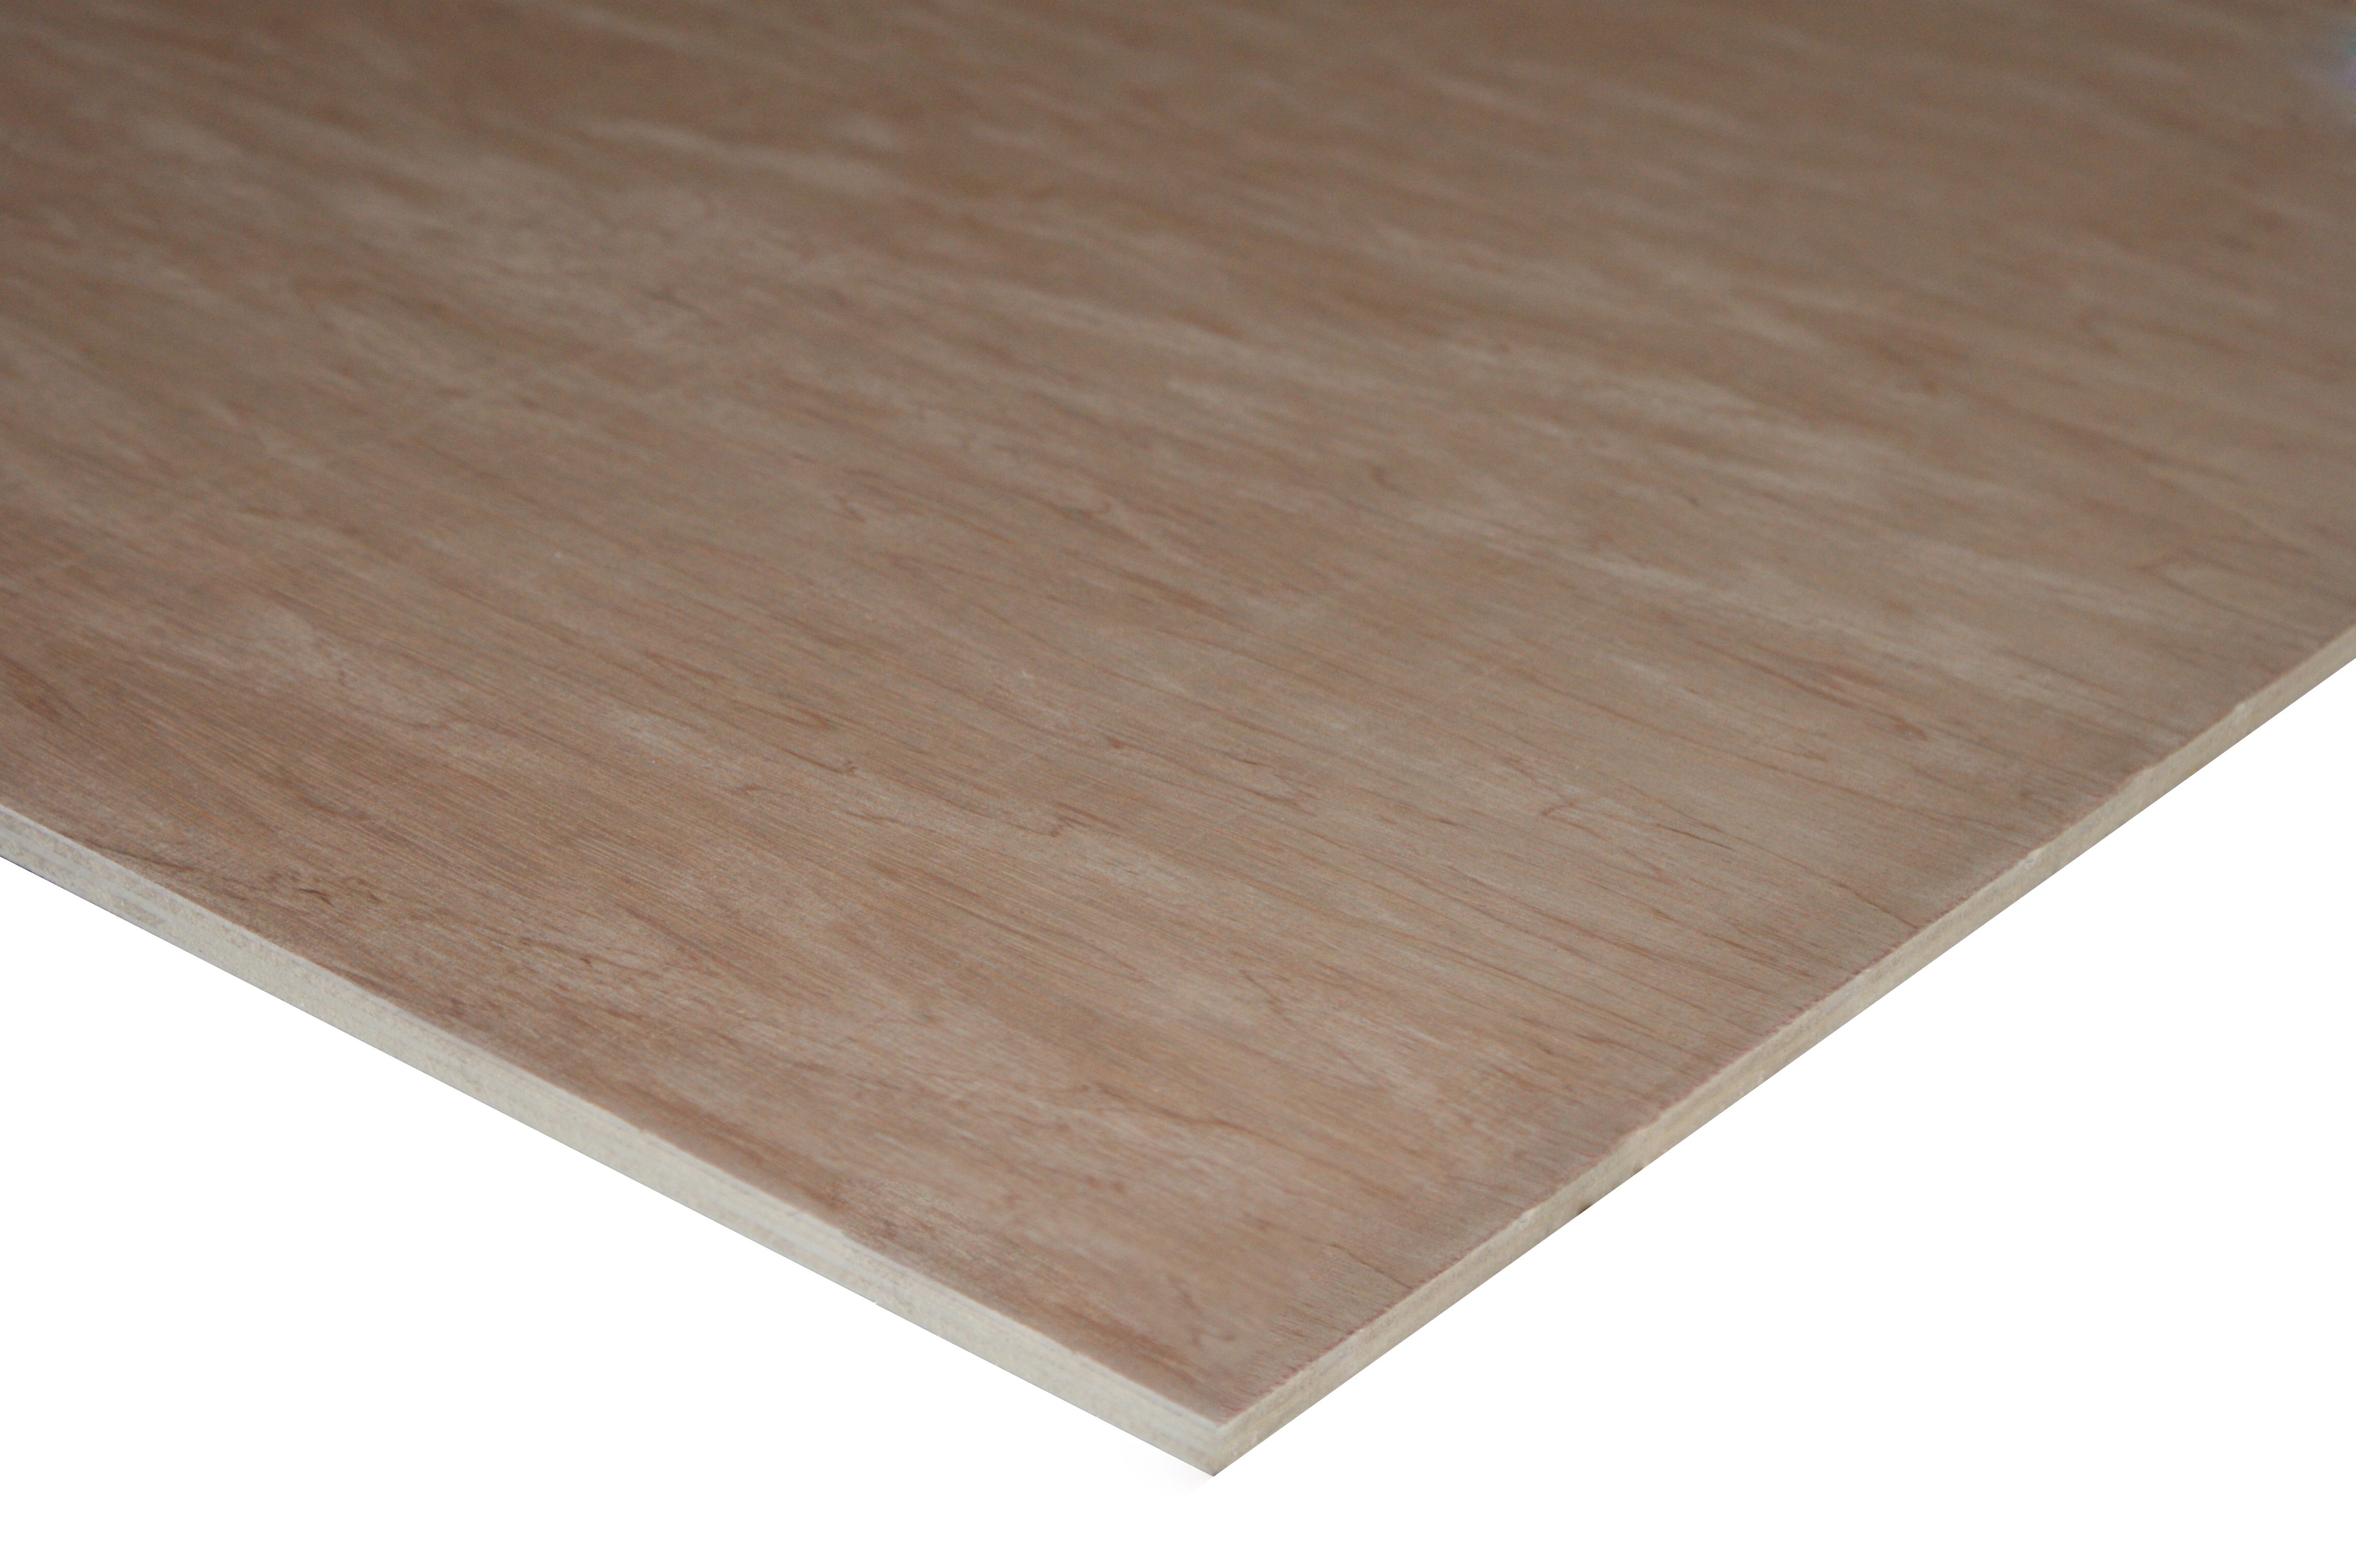 Non-Structural Hardwood Plywood Sheet - 9 x 607 x 1829mm